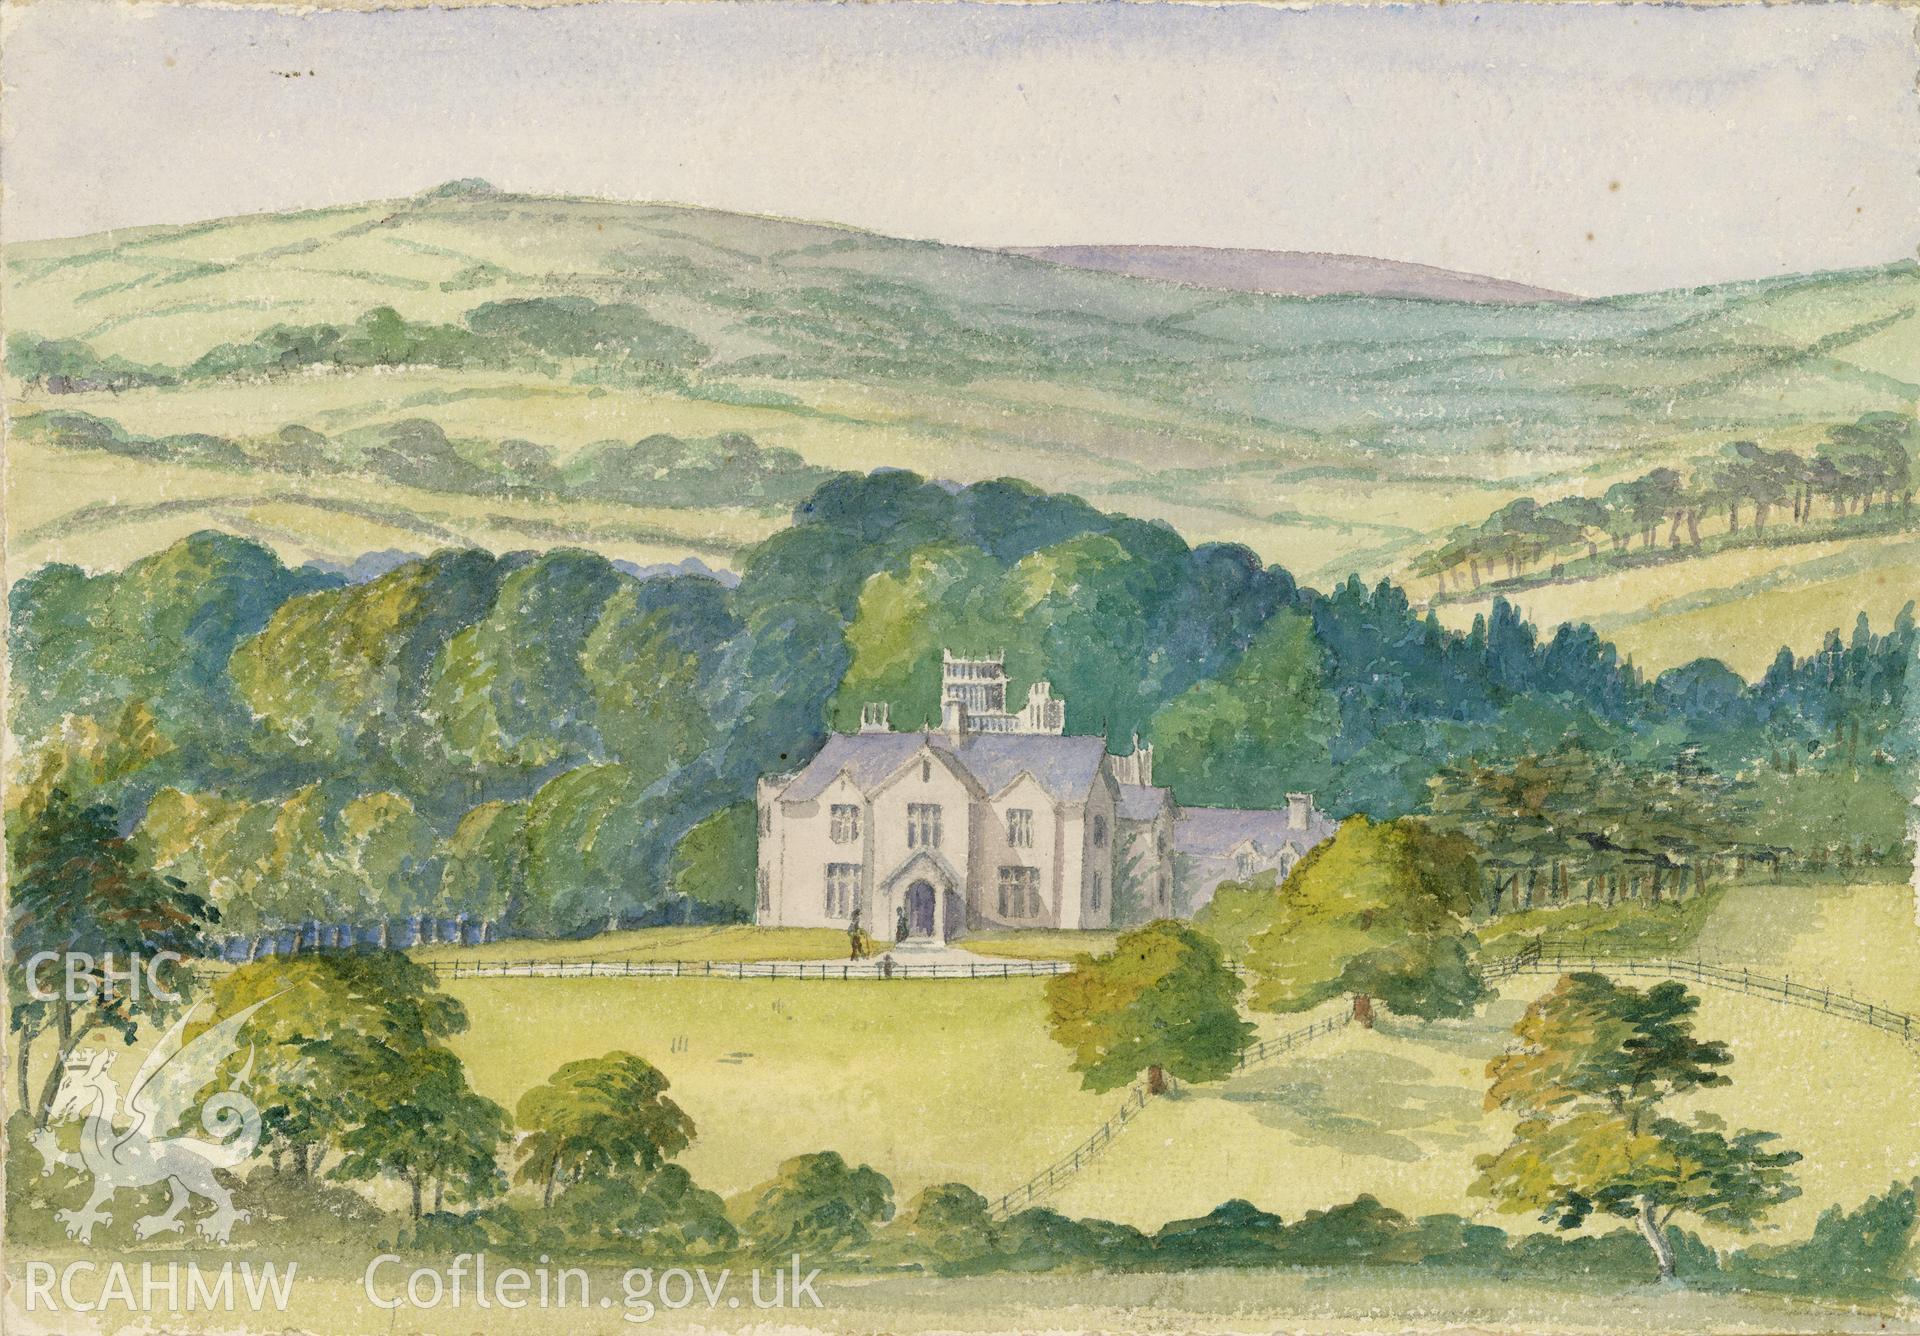 Digital copy of a watercolour painting showing Tonn House, Llandovery, anon. c1870.